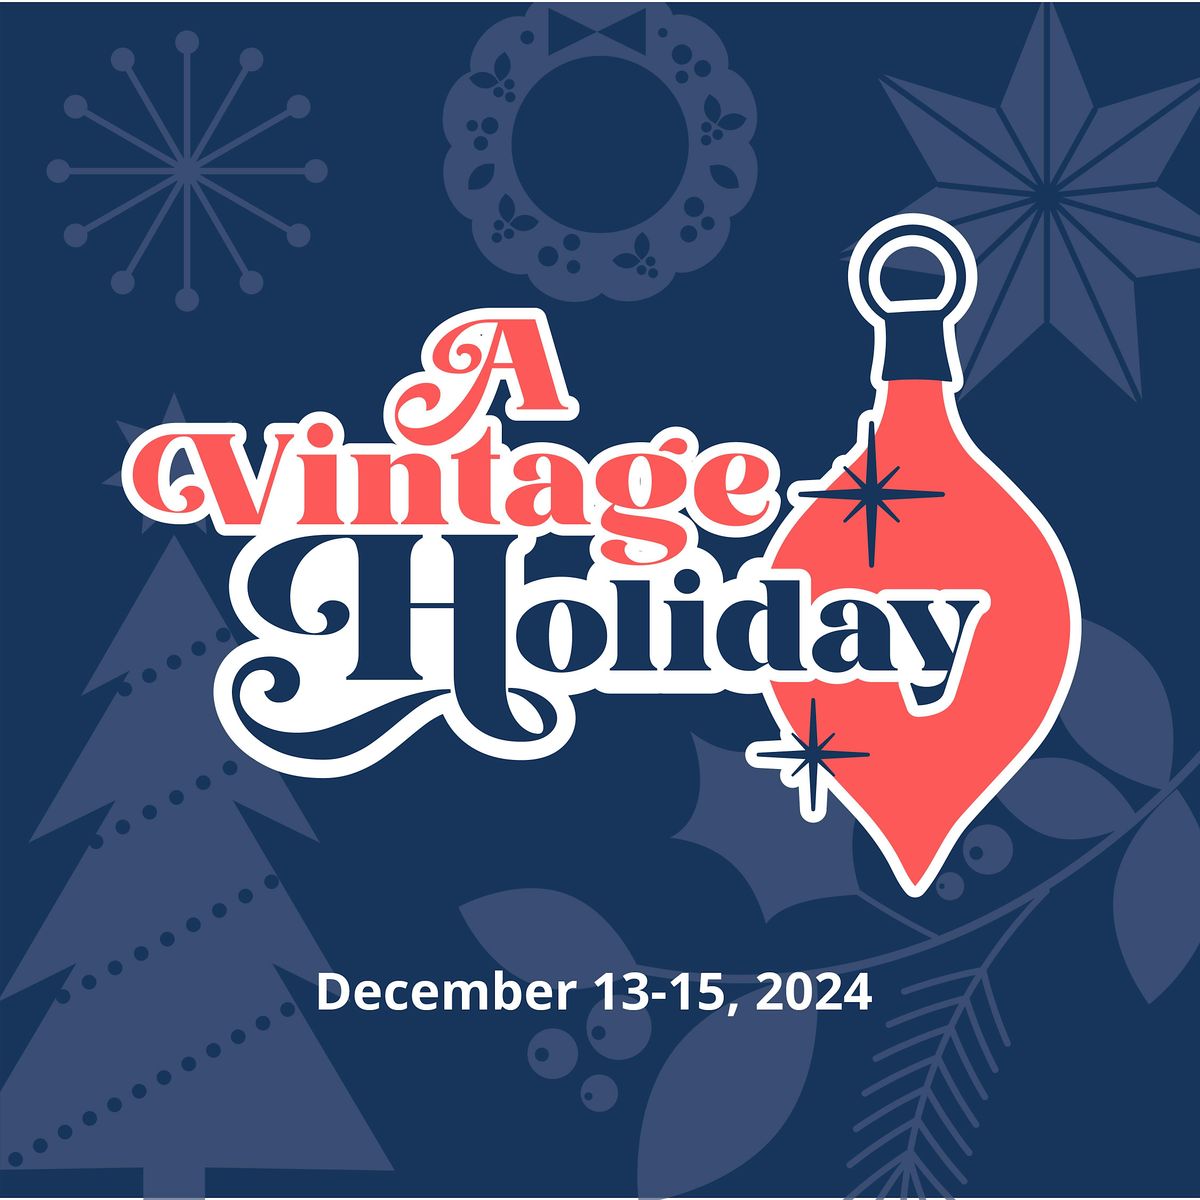 The ICC Presents - A Vintage Holiday